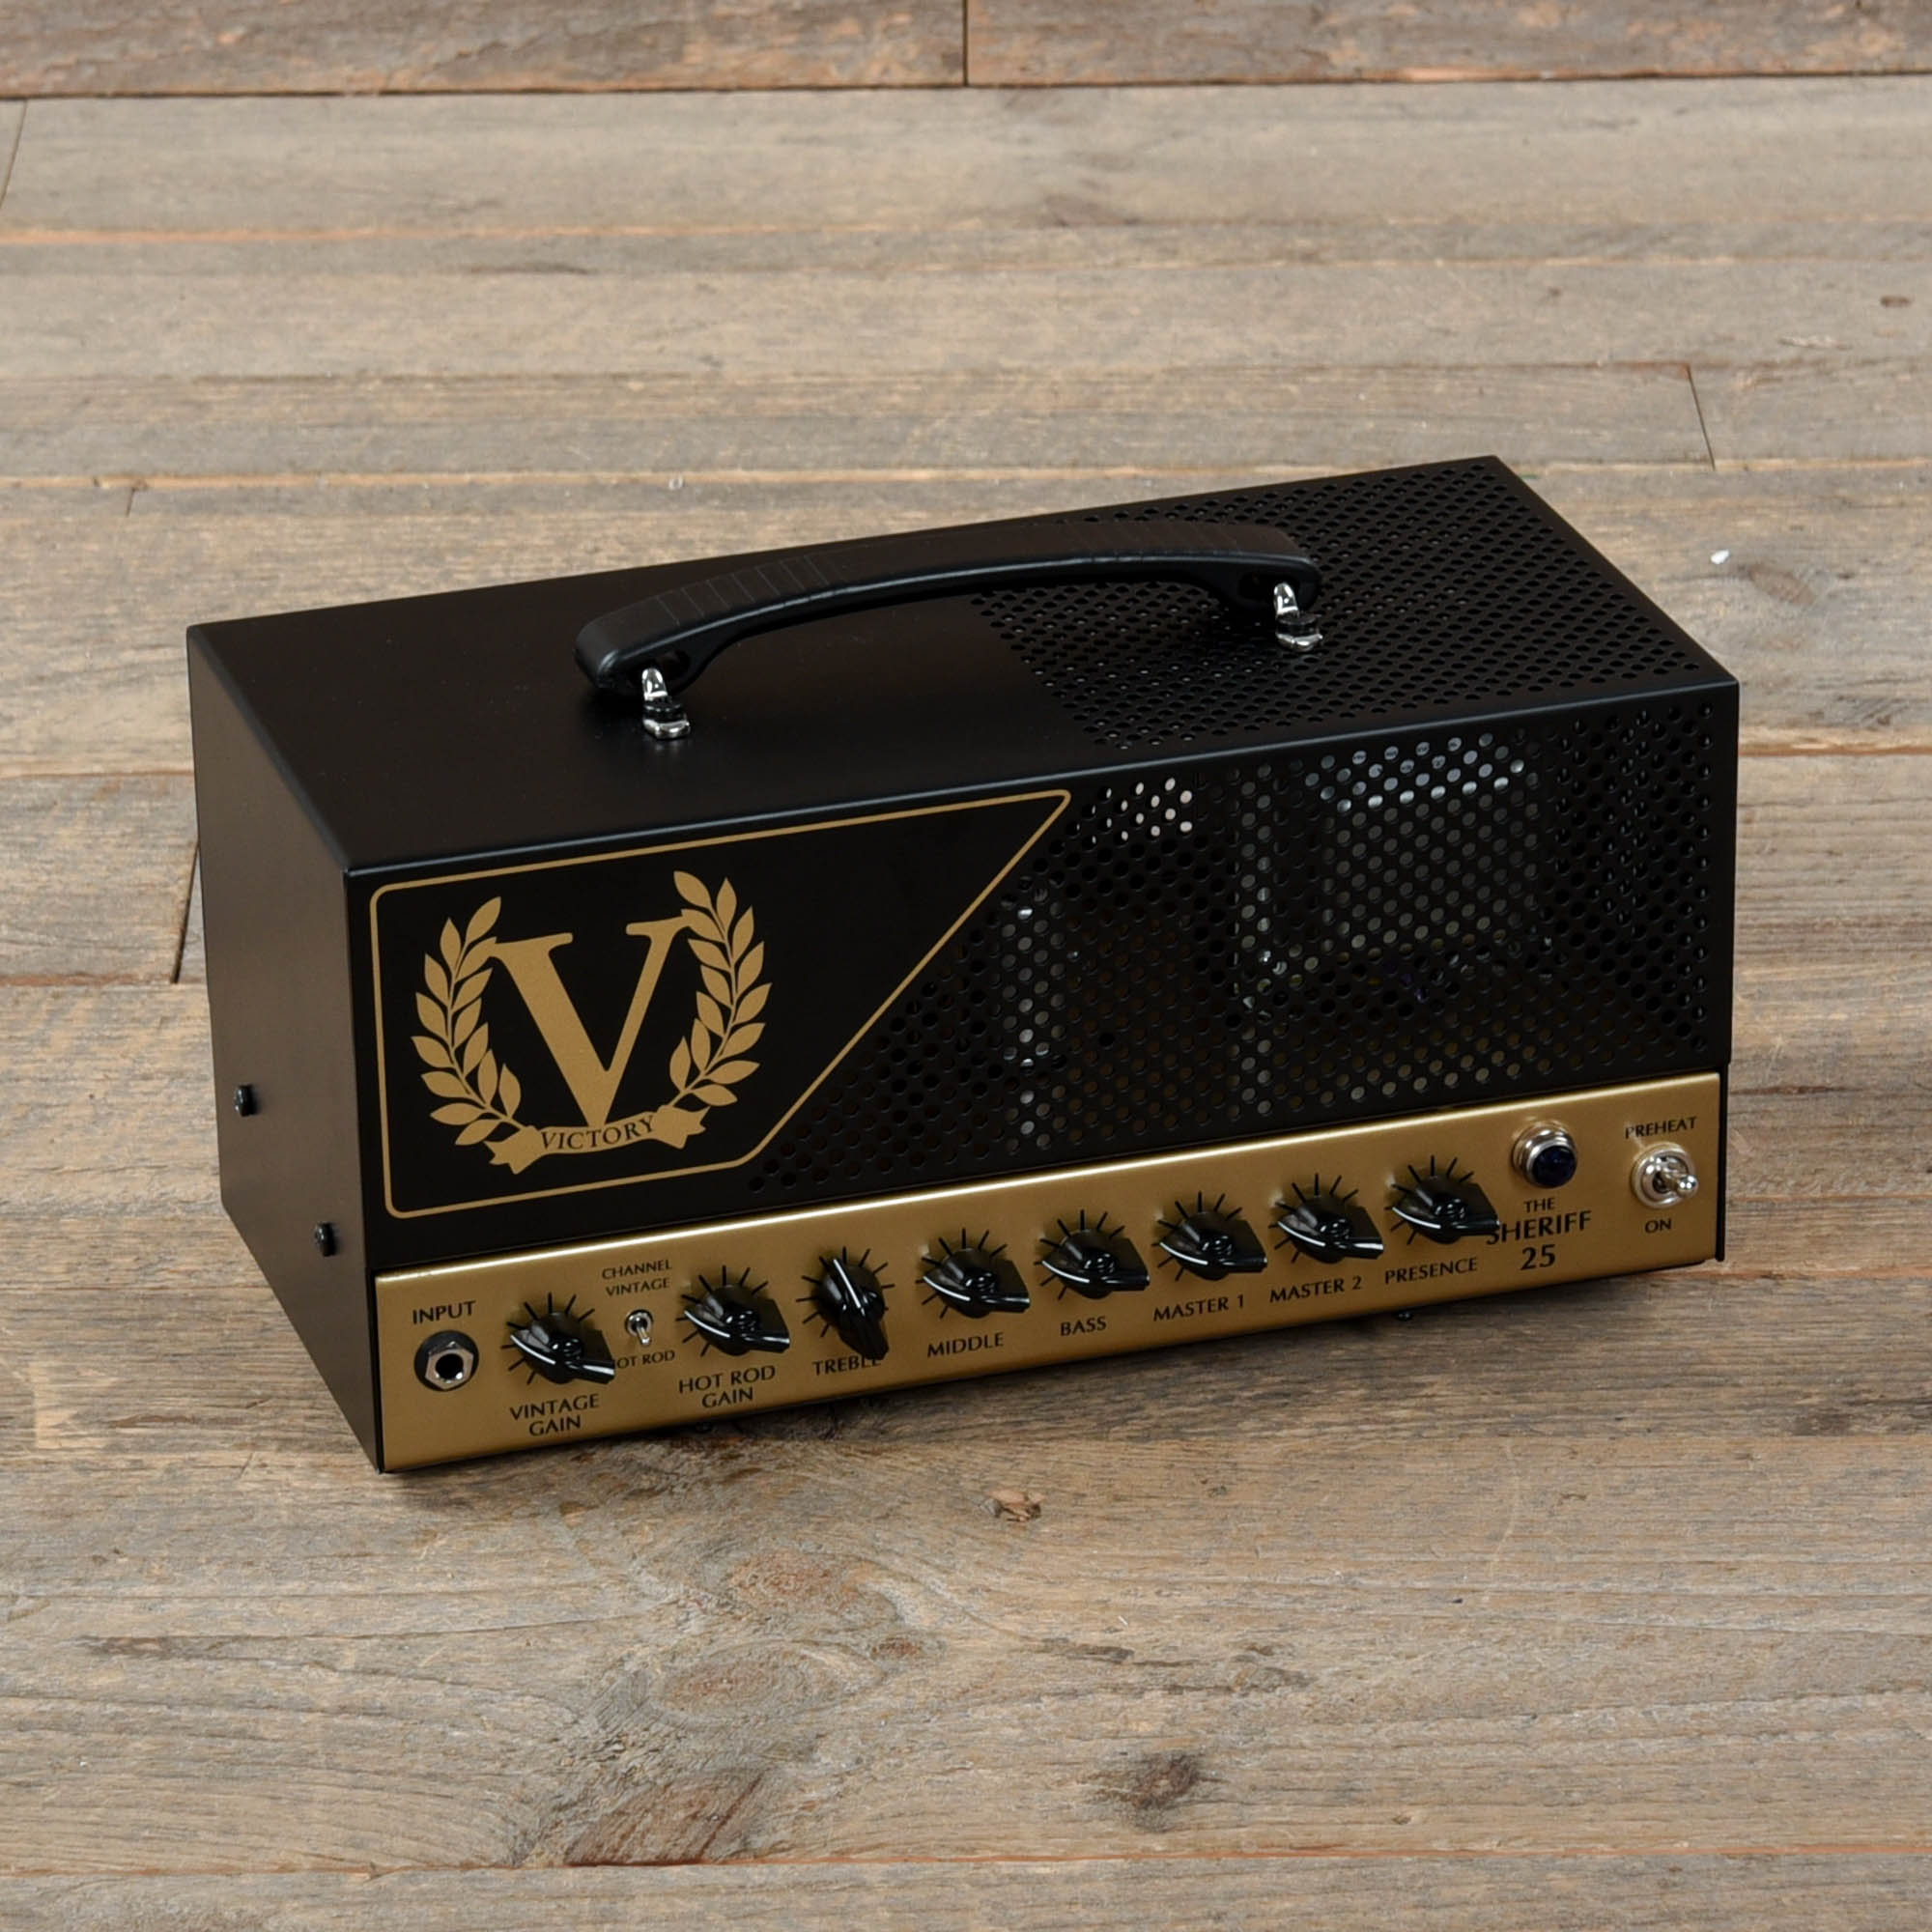 Victory Sheriff 25 Head Amps / Guitar Heads